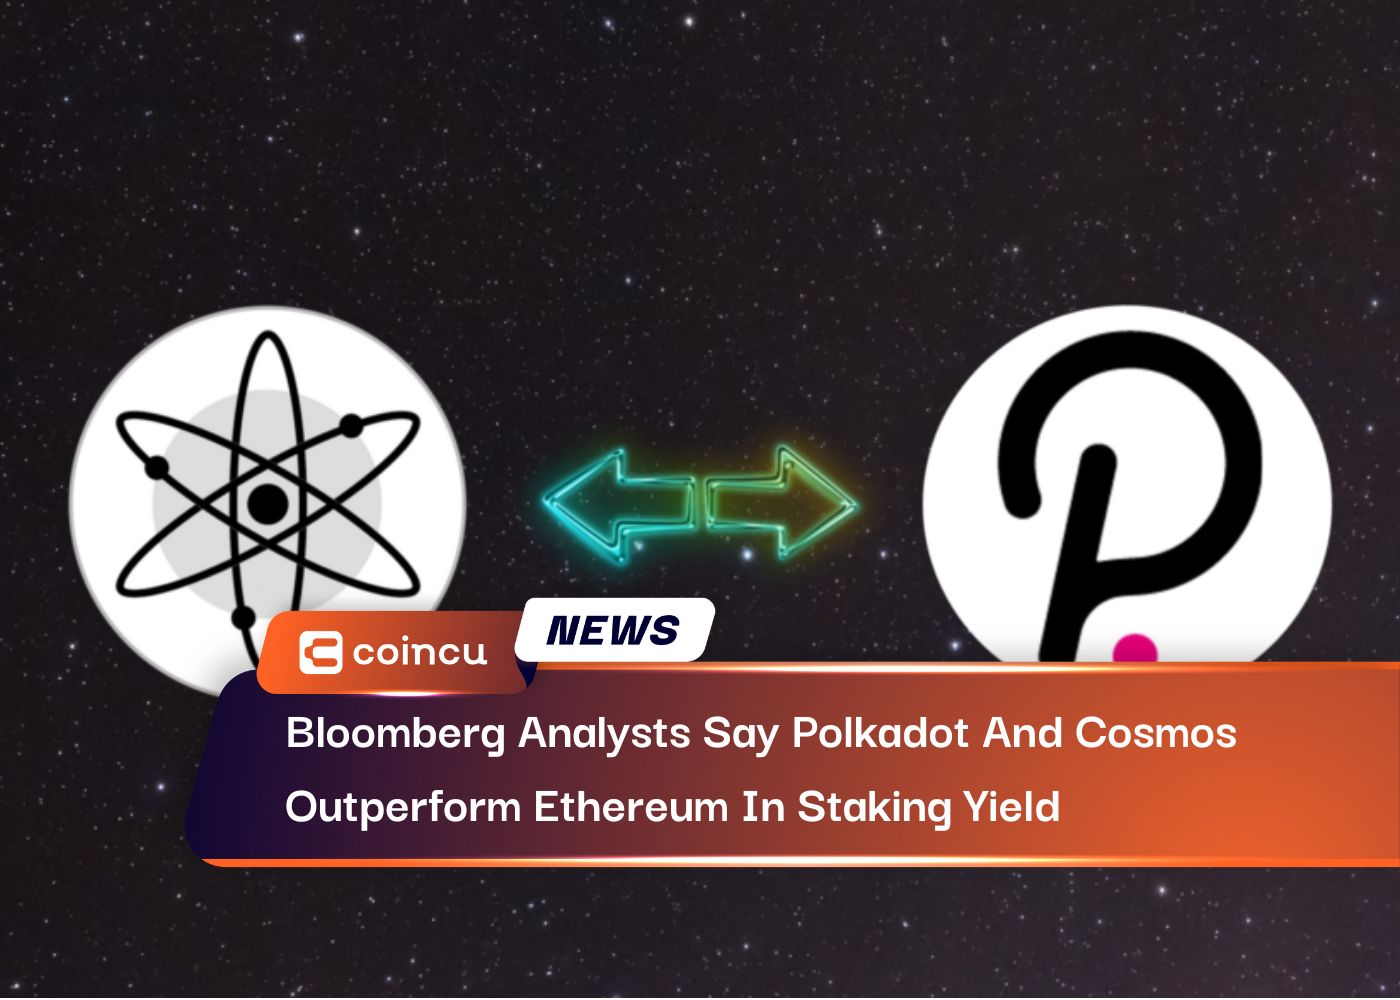 Bloomberg Analysts Say Polkadot And Cosmos Outperform Ethereum In Staking Yield